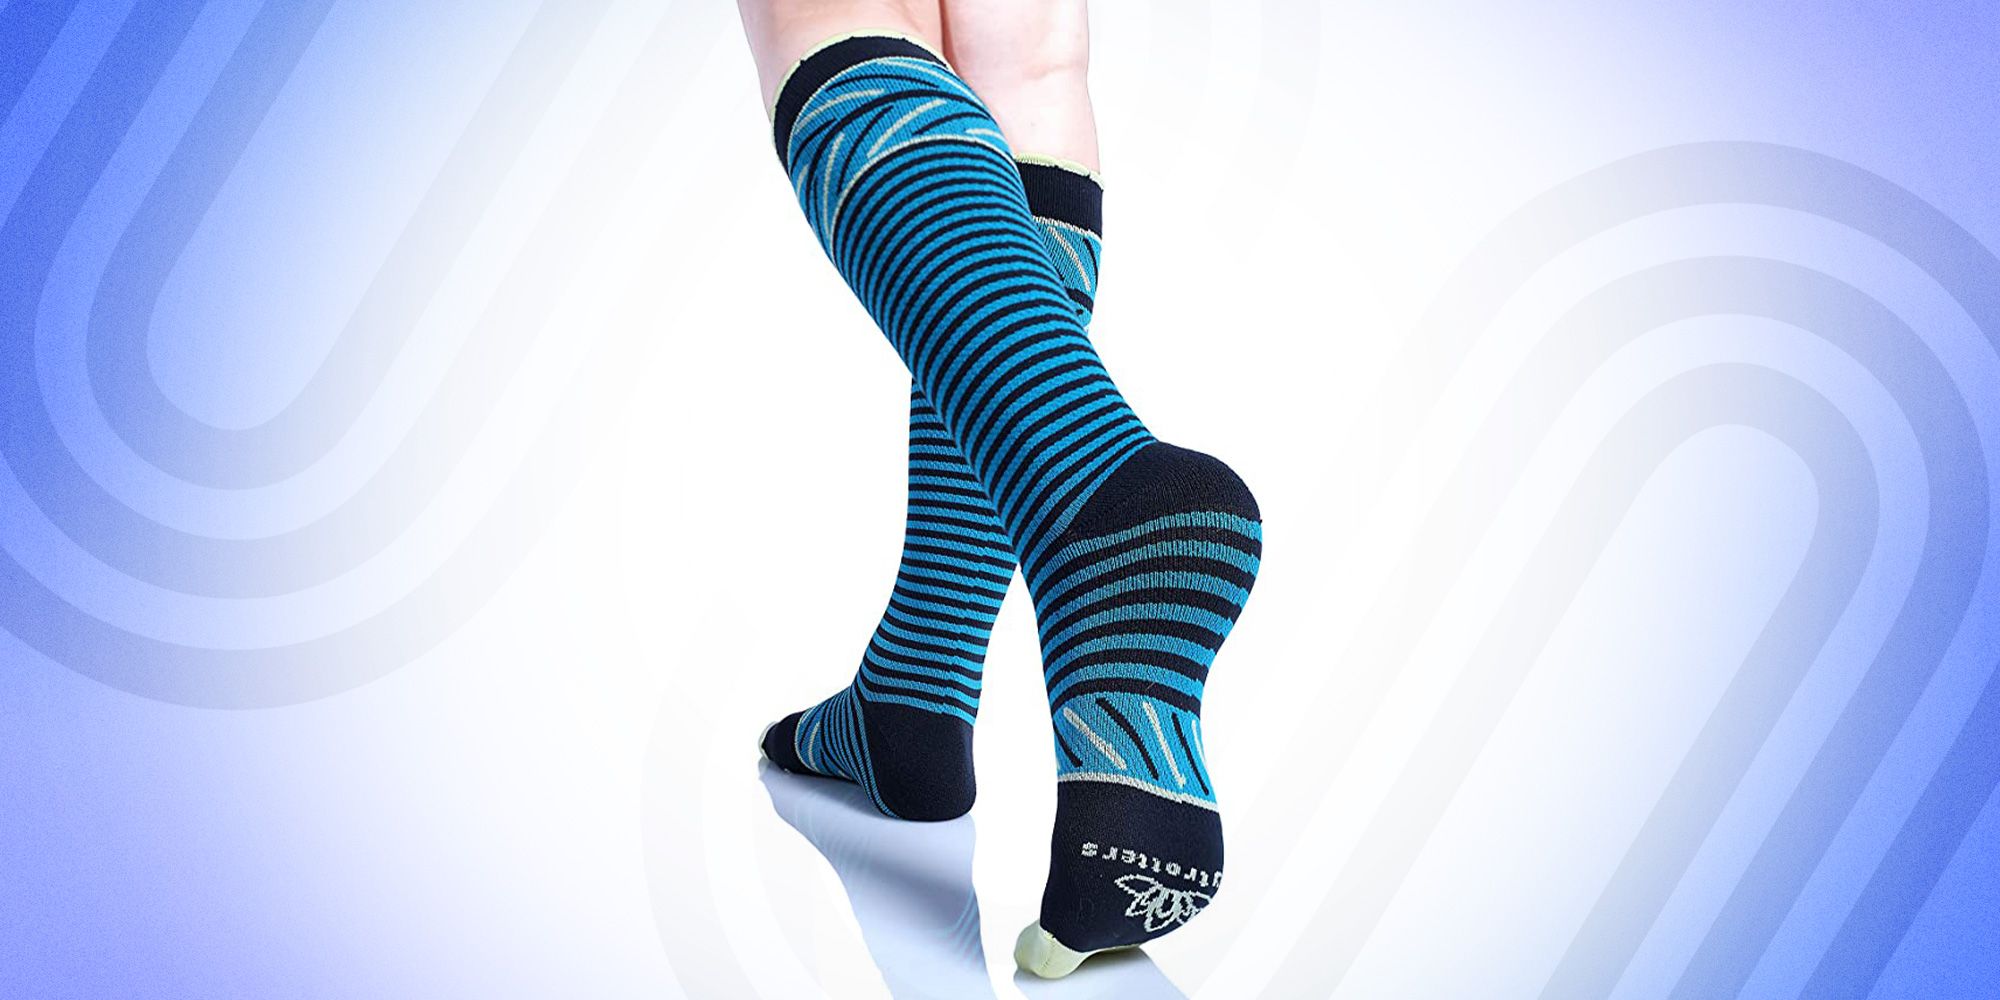 Unisex Running Compression Socks Professionally Padded Blister Free 2 Pairs 